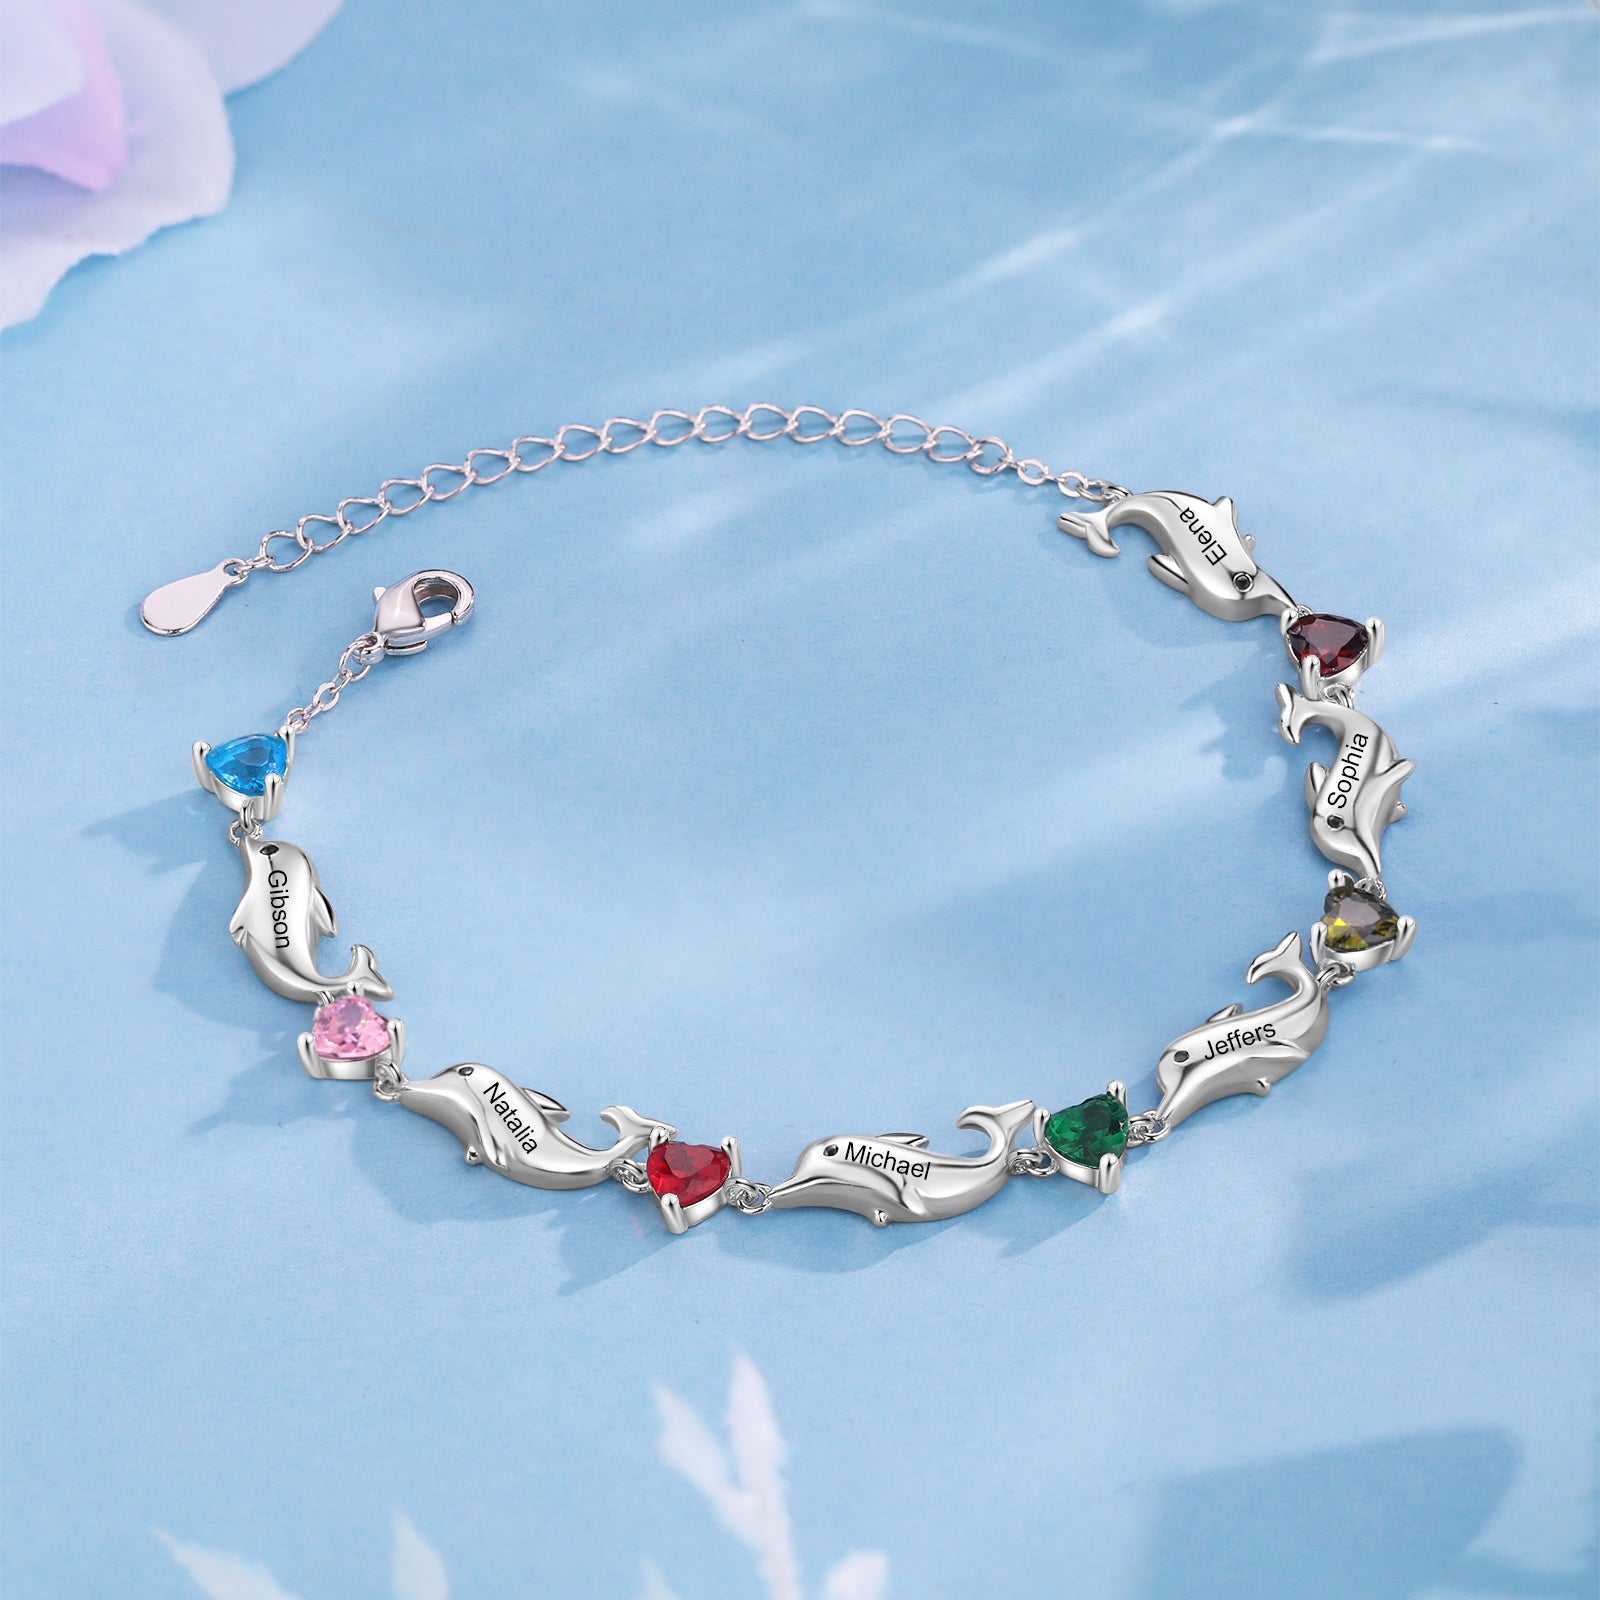 Personalized Dolphin Bracelet for Women Custom Name Link Bracelet with Simulated Birthstone Adjustable Chain Charm Dolphin Jewelry (2-6 Names)